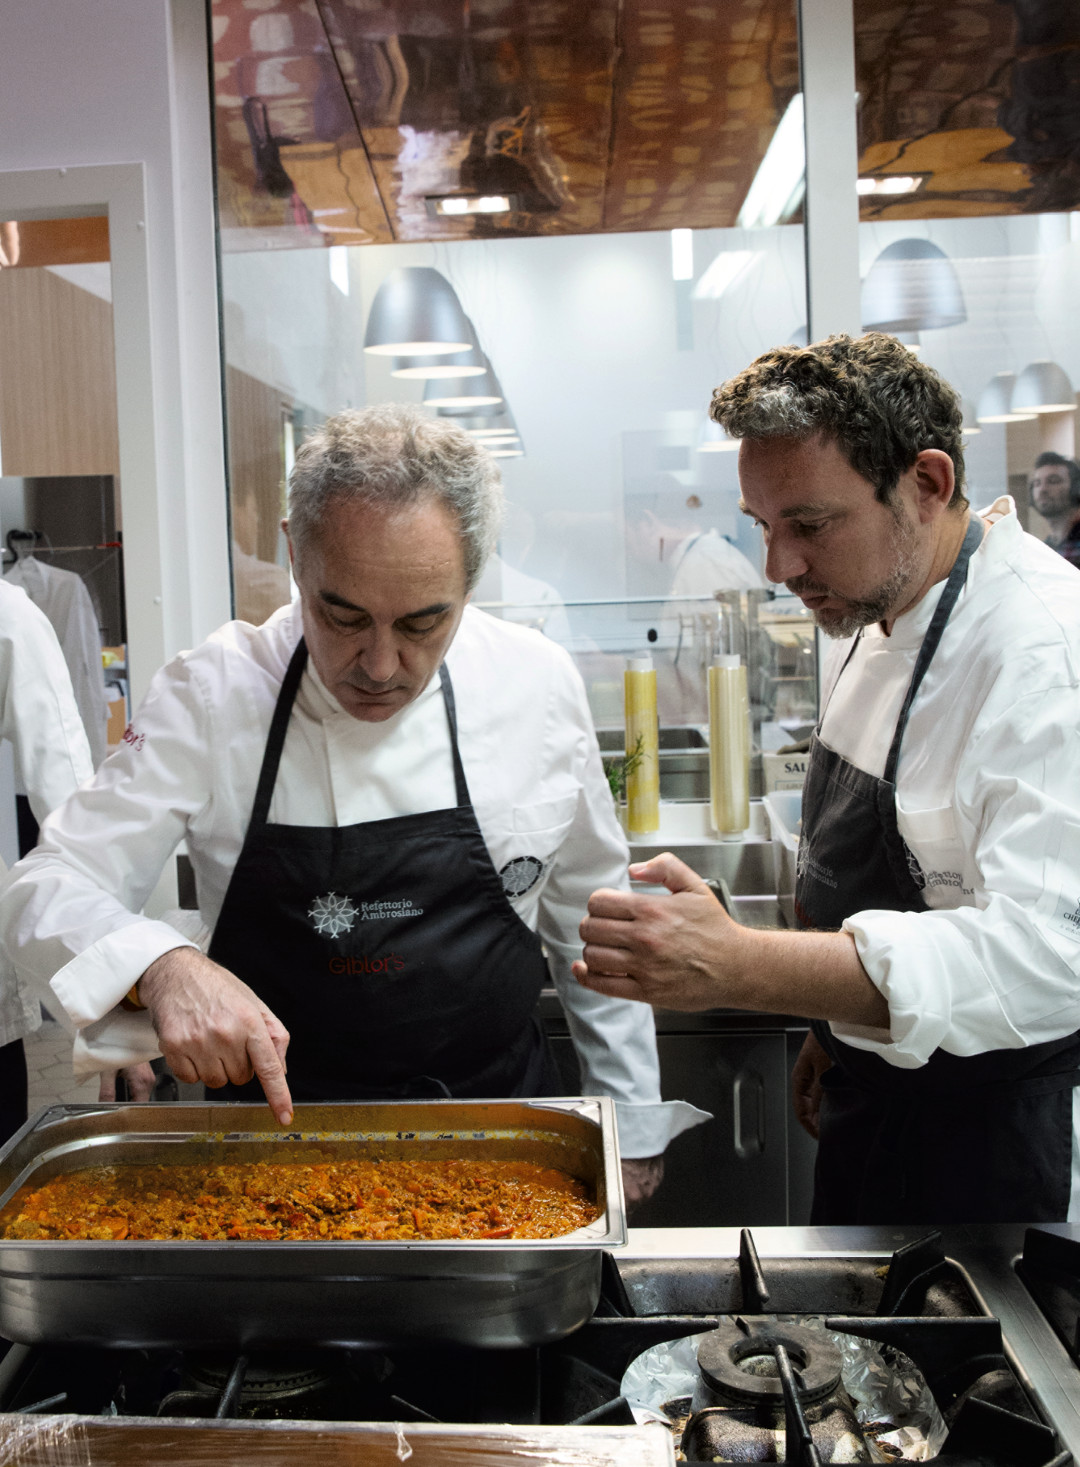 Ferran and Albert Adrià at Refettorio Ambrosiano, as reproduced in Bread is Gold